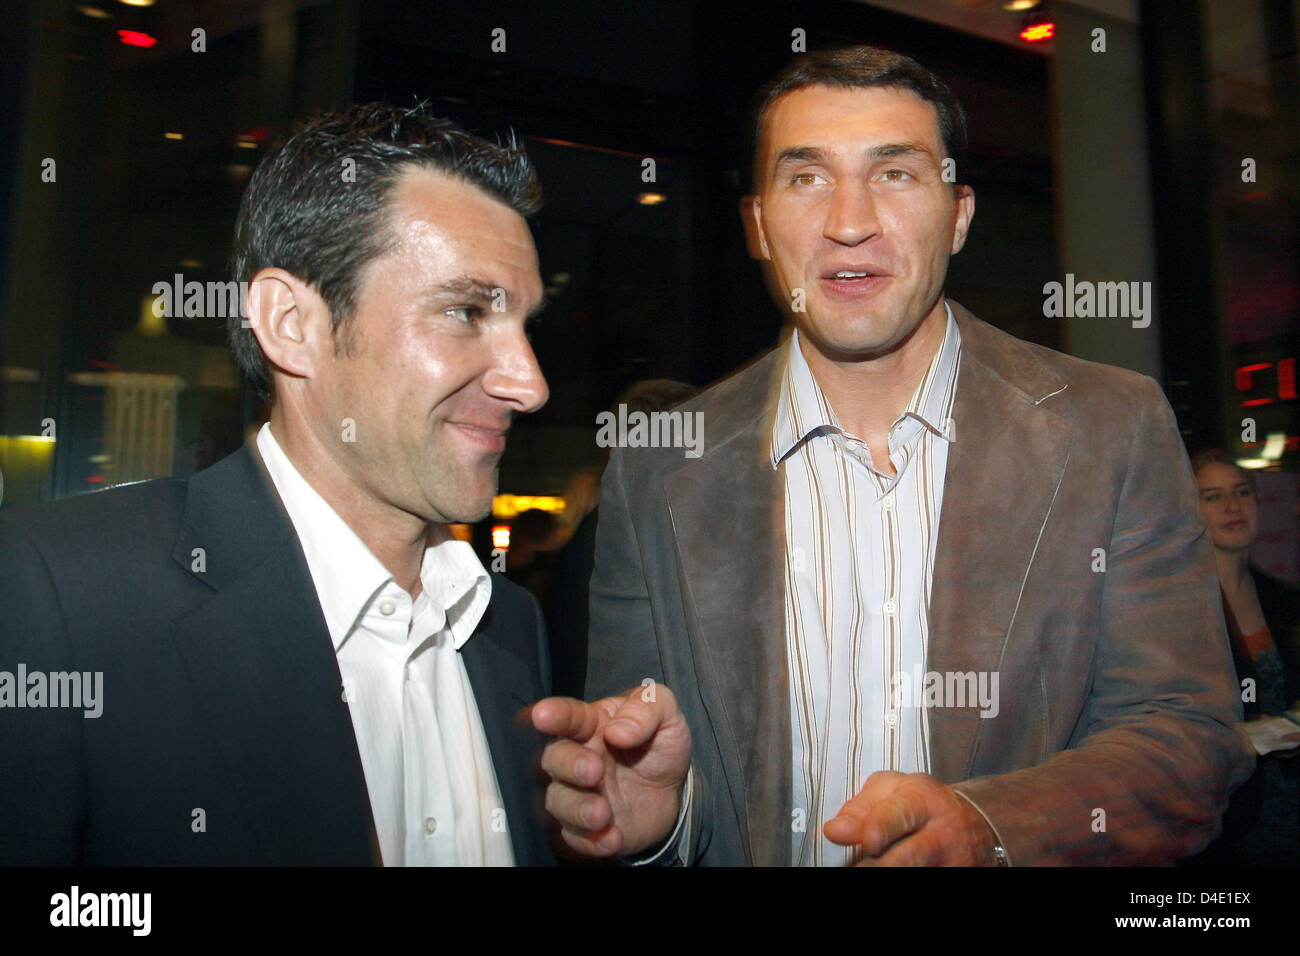 Holder of the WBO heavyweight title Vladimir Klitschko (R) and Carl-Uwe Steeb, director of the ATP Masters Series, are pictured during the red carpet event at 'Copper House' restaurant in Hamburg, Germany, 14 May 2008. Participants of the tennis tournament celebrated together with the high society and prominent persons of commercial and political circles. Photo: MARCUS BRANDT Stock Photo